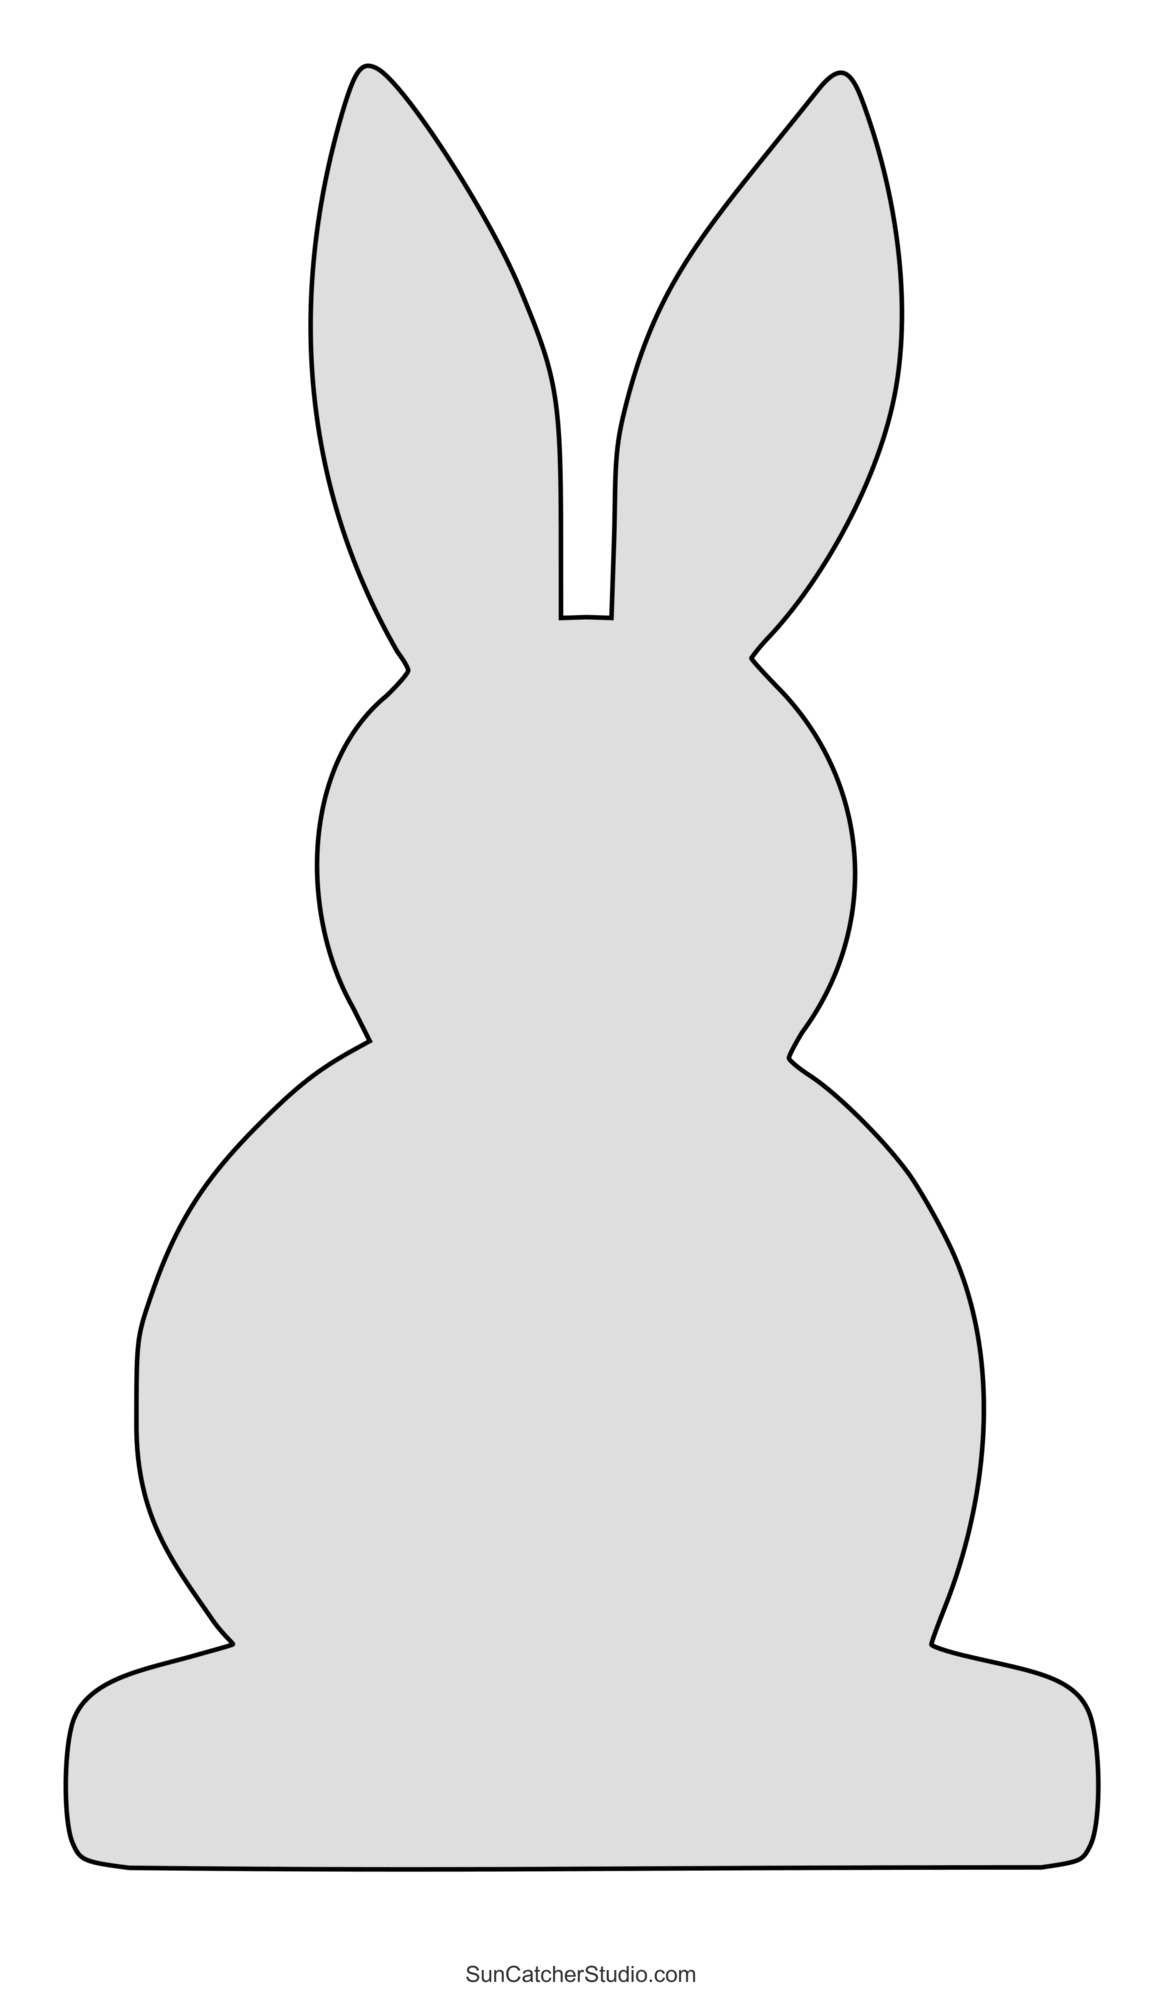 Easter Clip Art Patterns (Egg and Bunny Stencils) – DIY Projects, Patterns,  Monograms, Designs, Templates